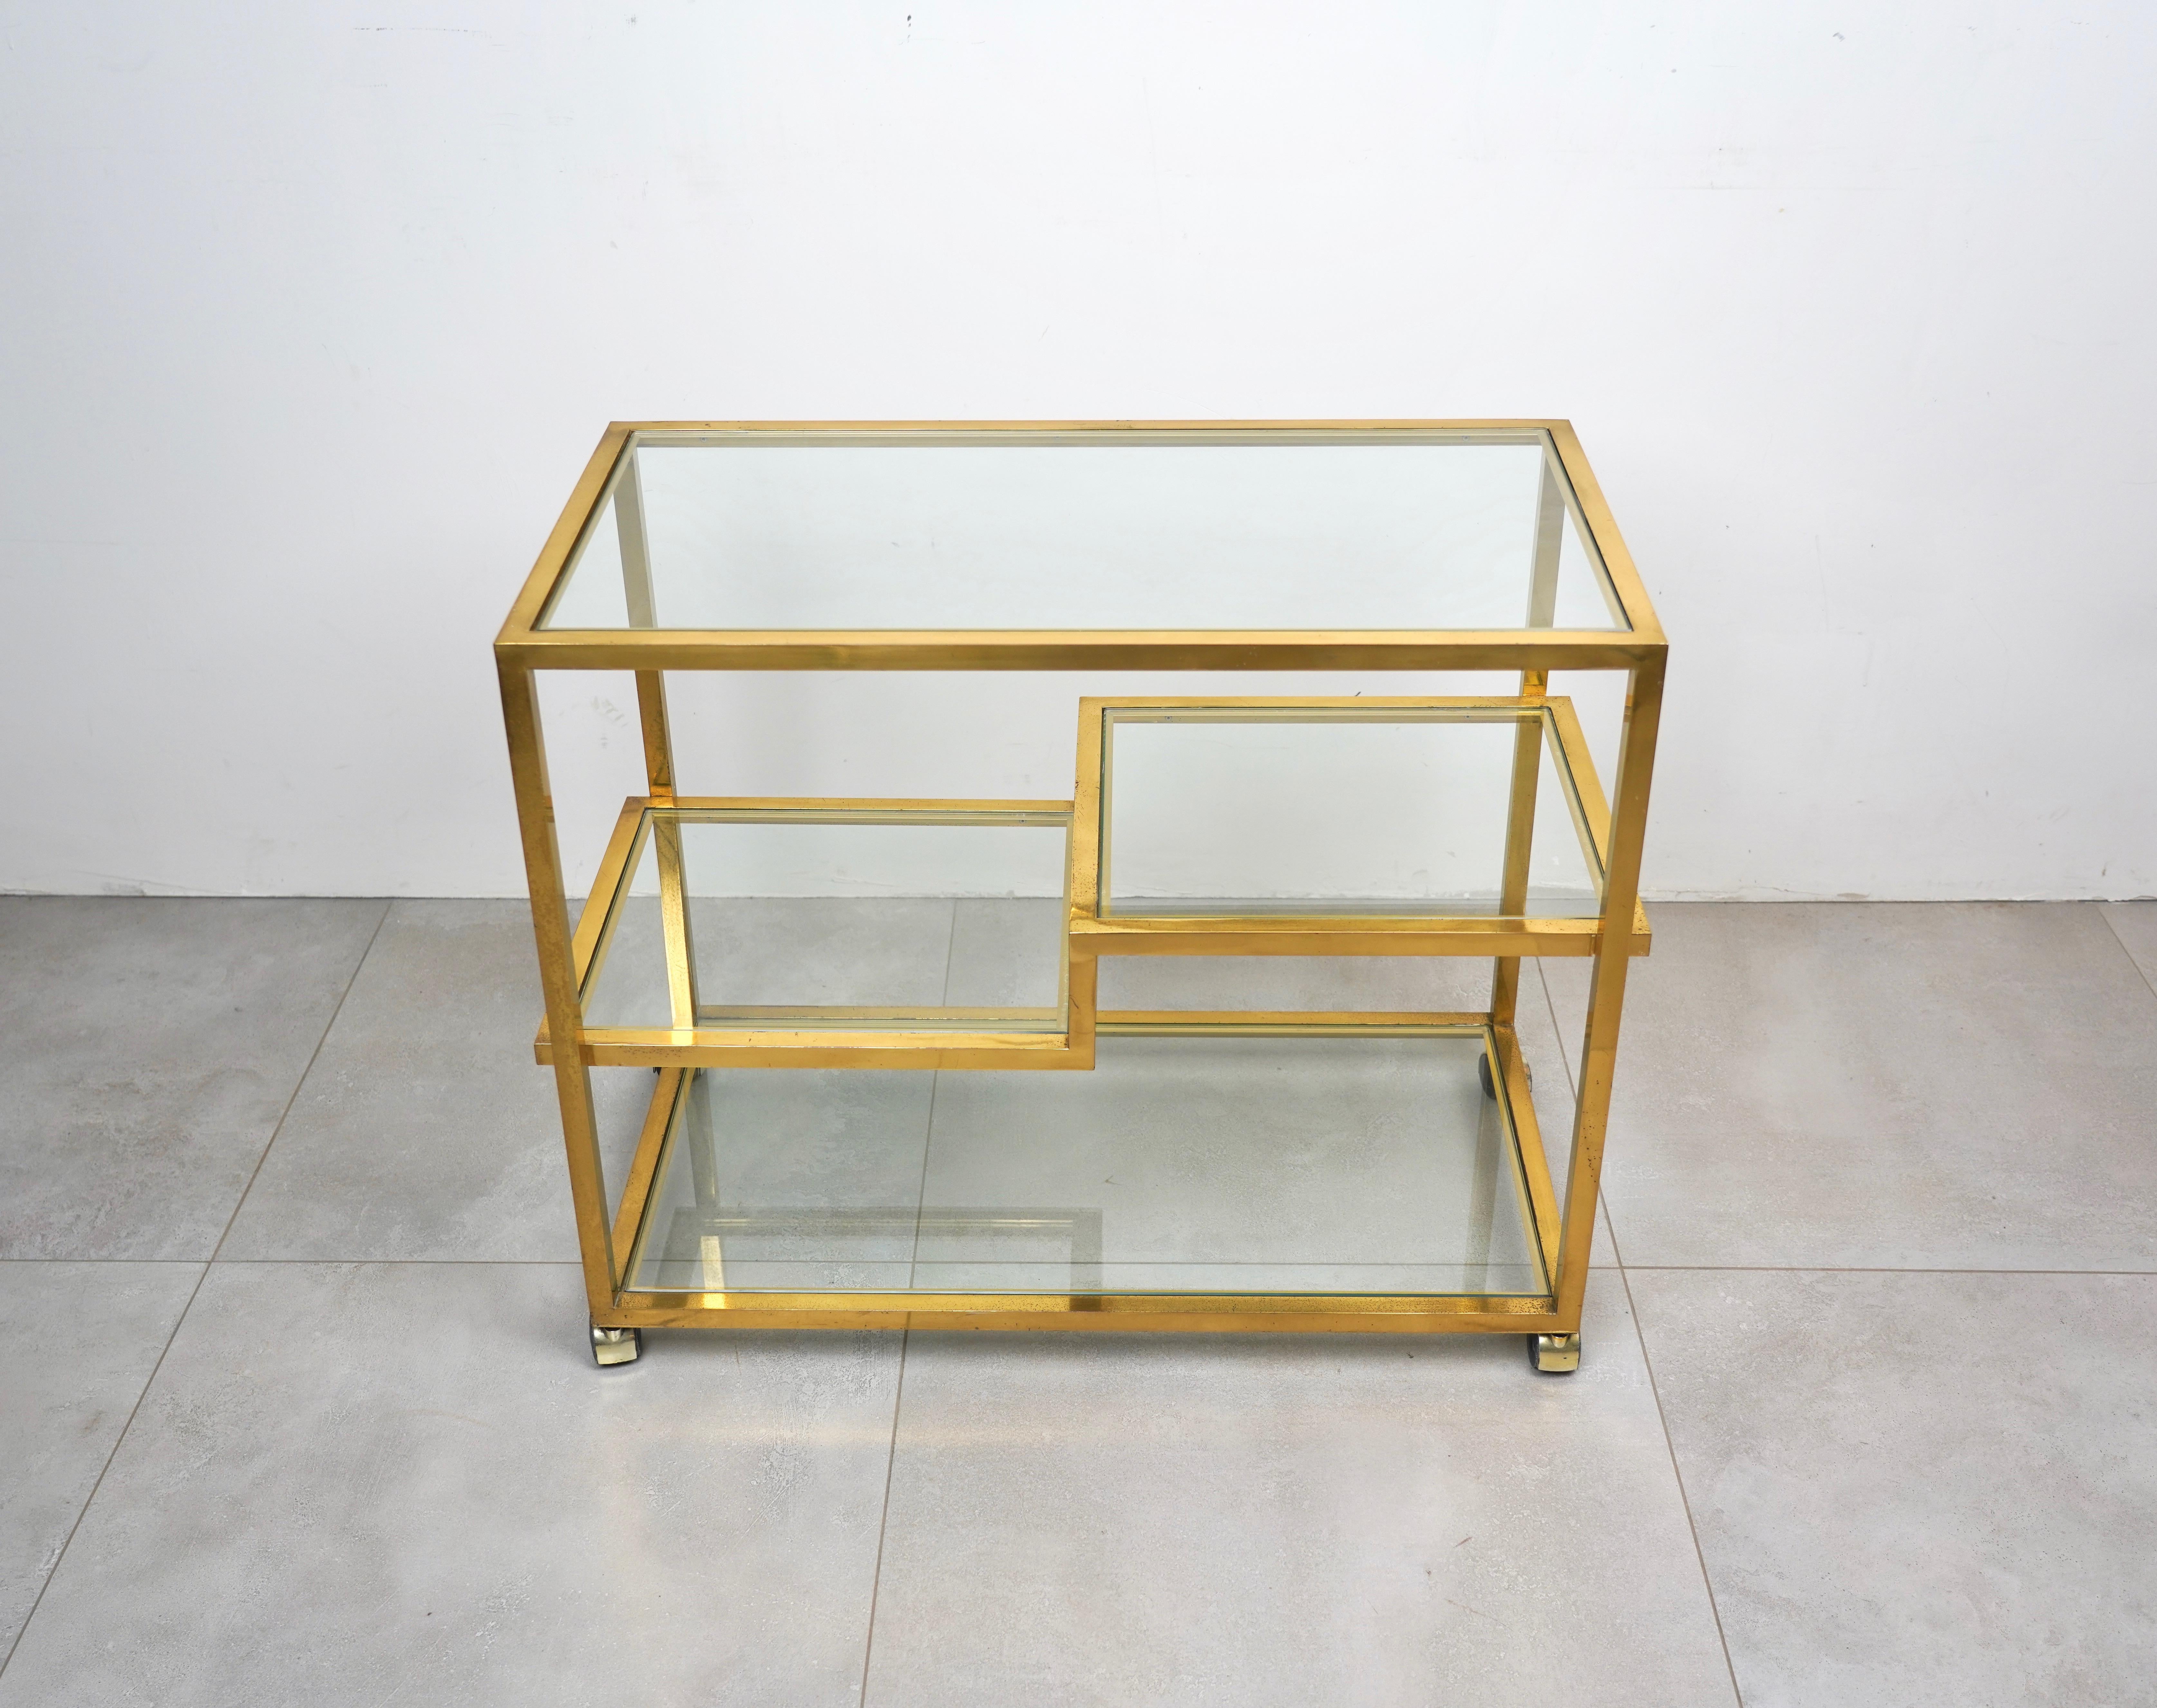 This vintage brass serving cart features unique midcentury design, combining simple lines and plenty of room for storage or service. In the style of to the Italian designer Romeo Rega. Made in Italy in the 1970s.